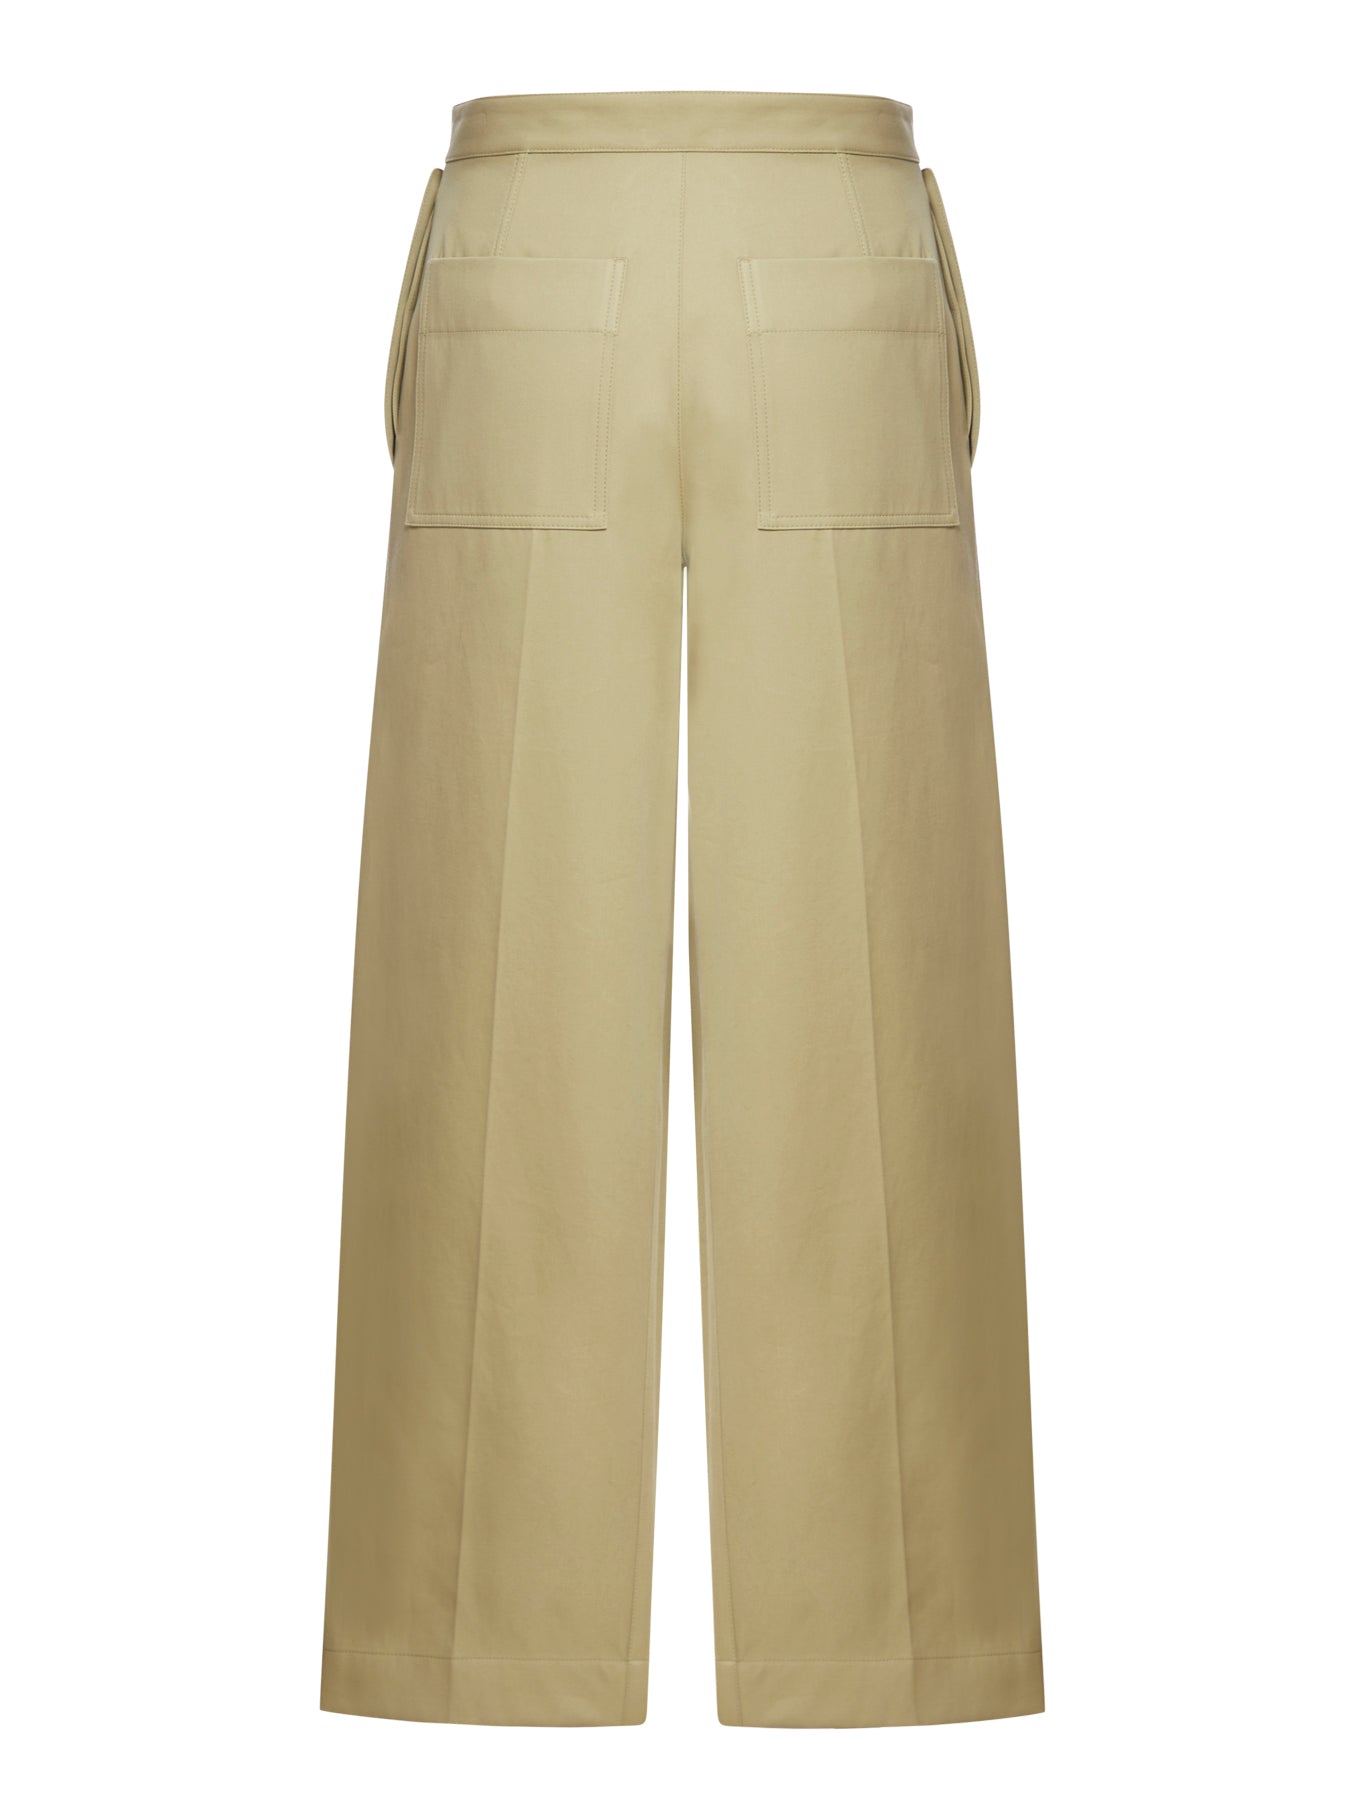 COTTON TWILL SAILOR TROUSERS